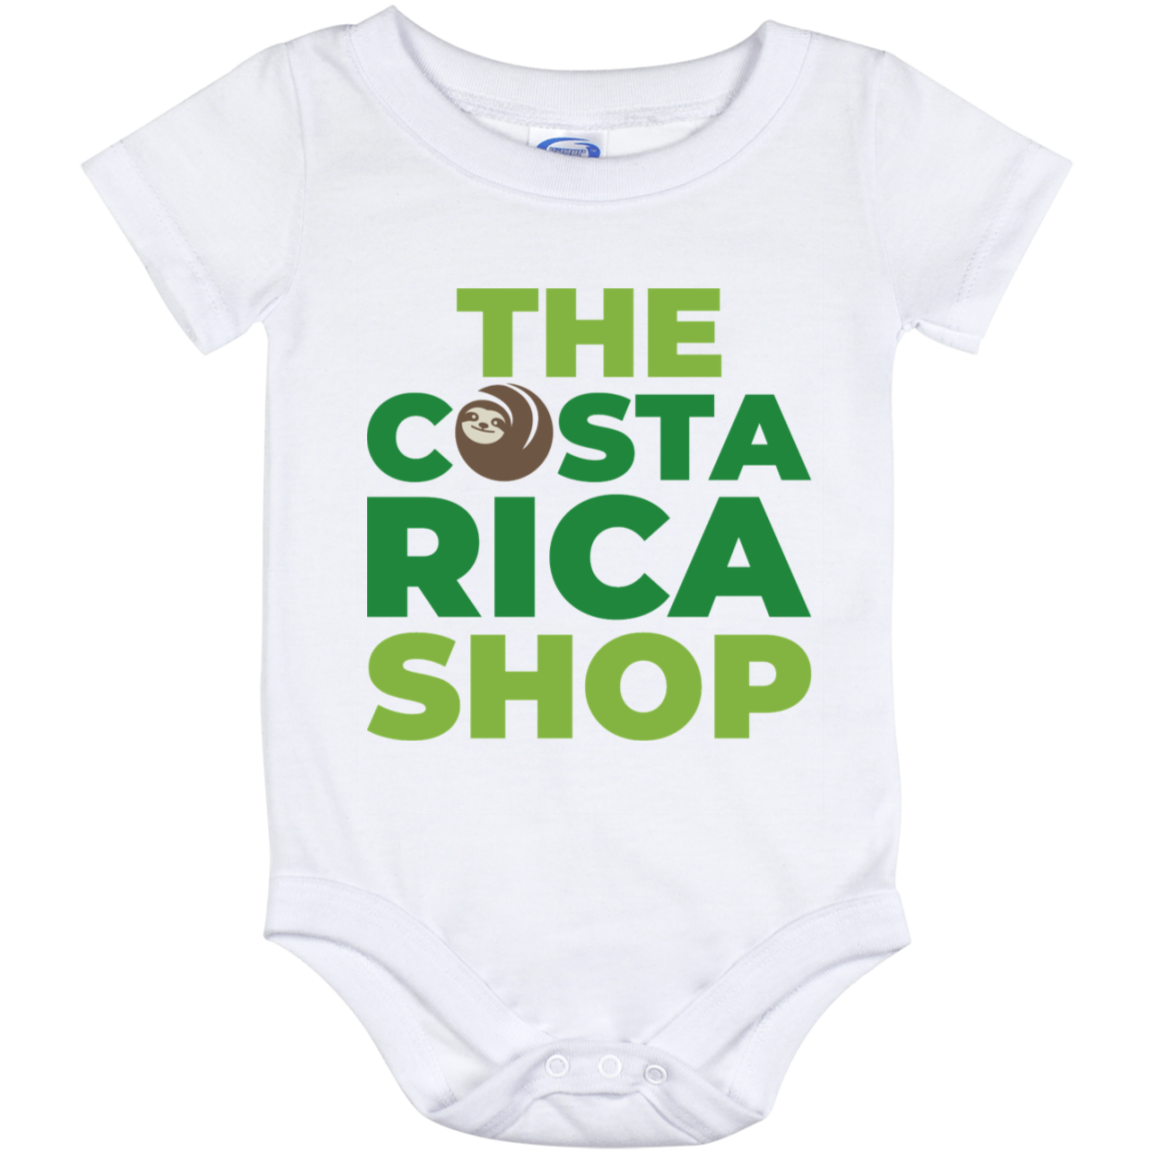 TCRS Baby Onesie 12 Month